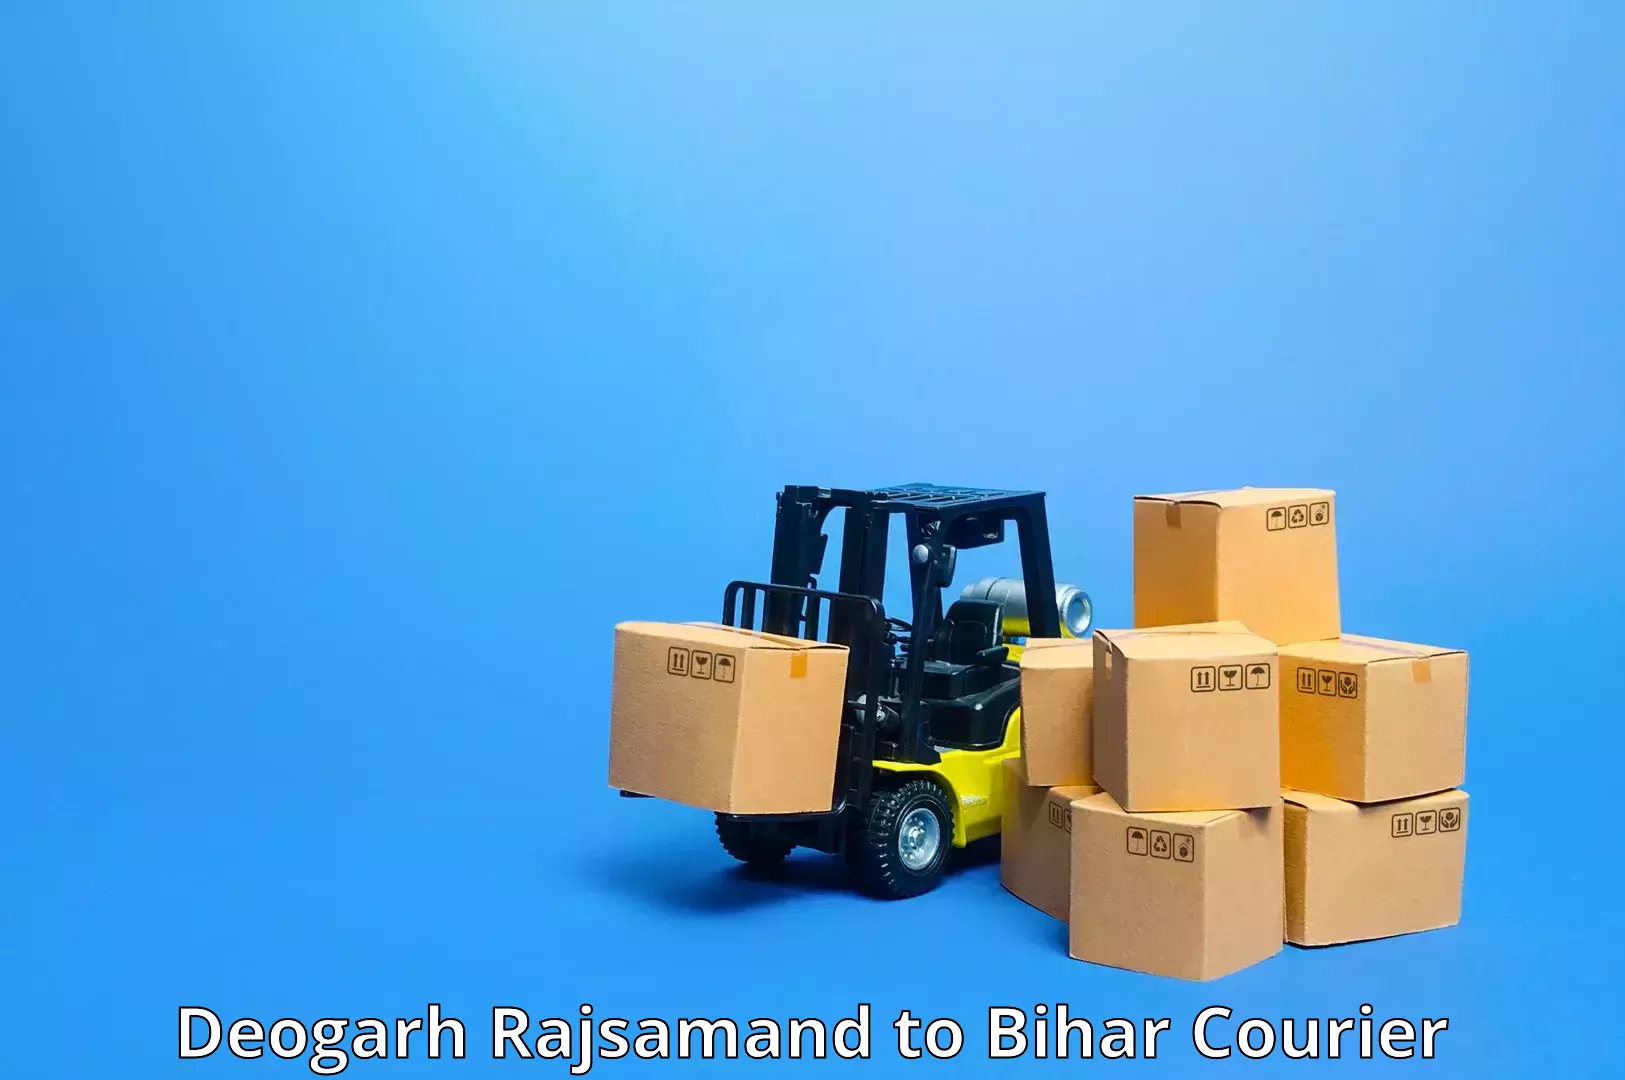 Large-scale shipping solutions Deogarh Rajsamand to Dighwara